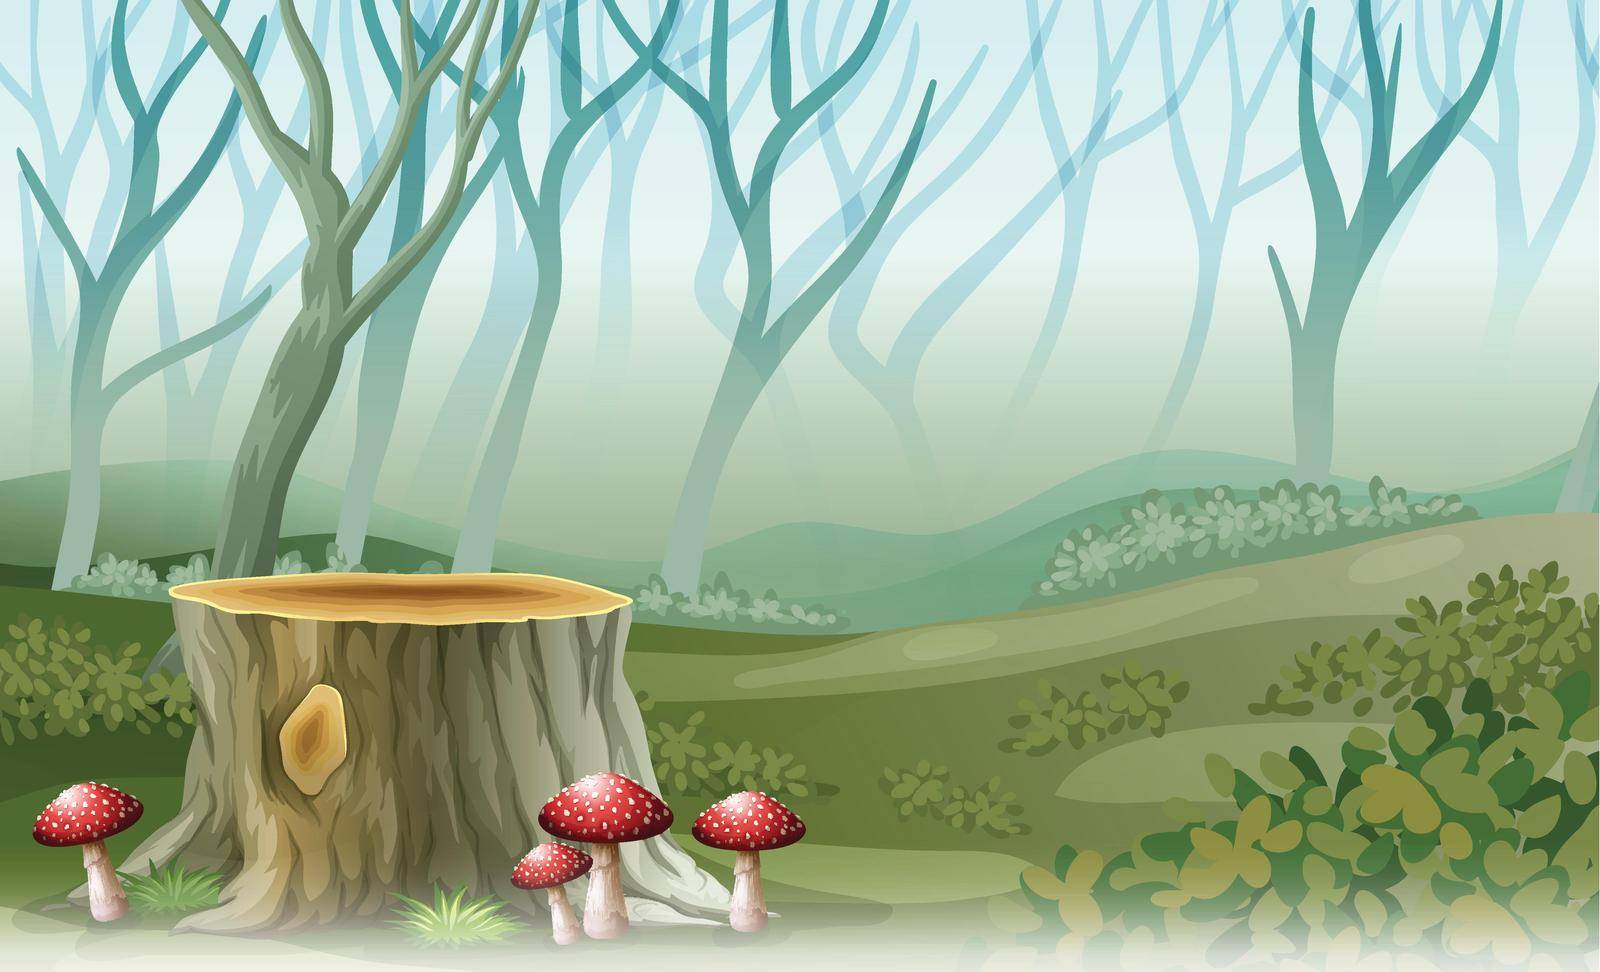 Illustration of a stump at the forest